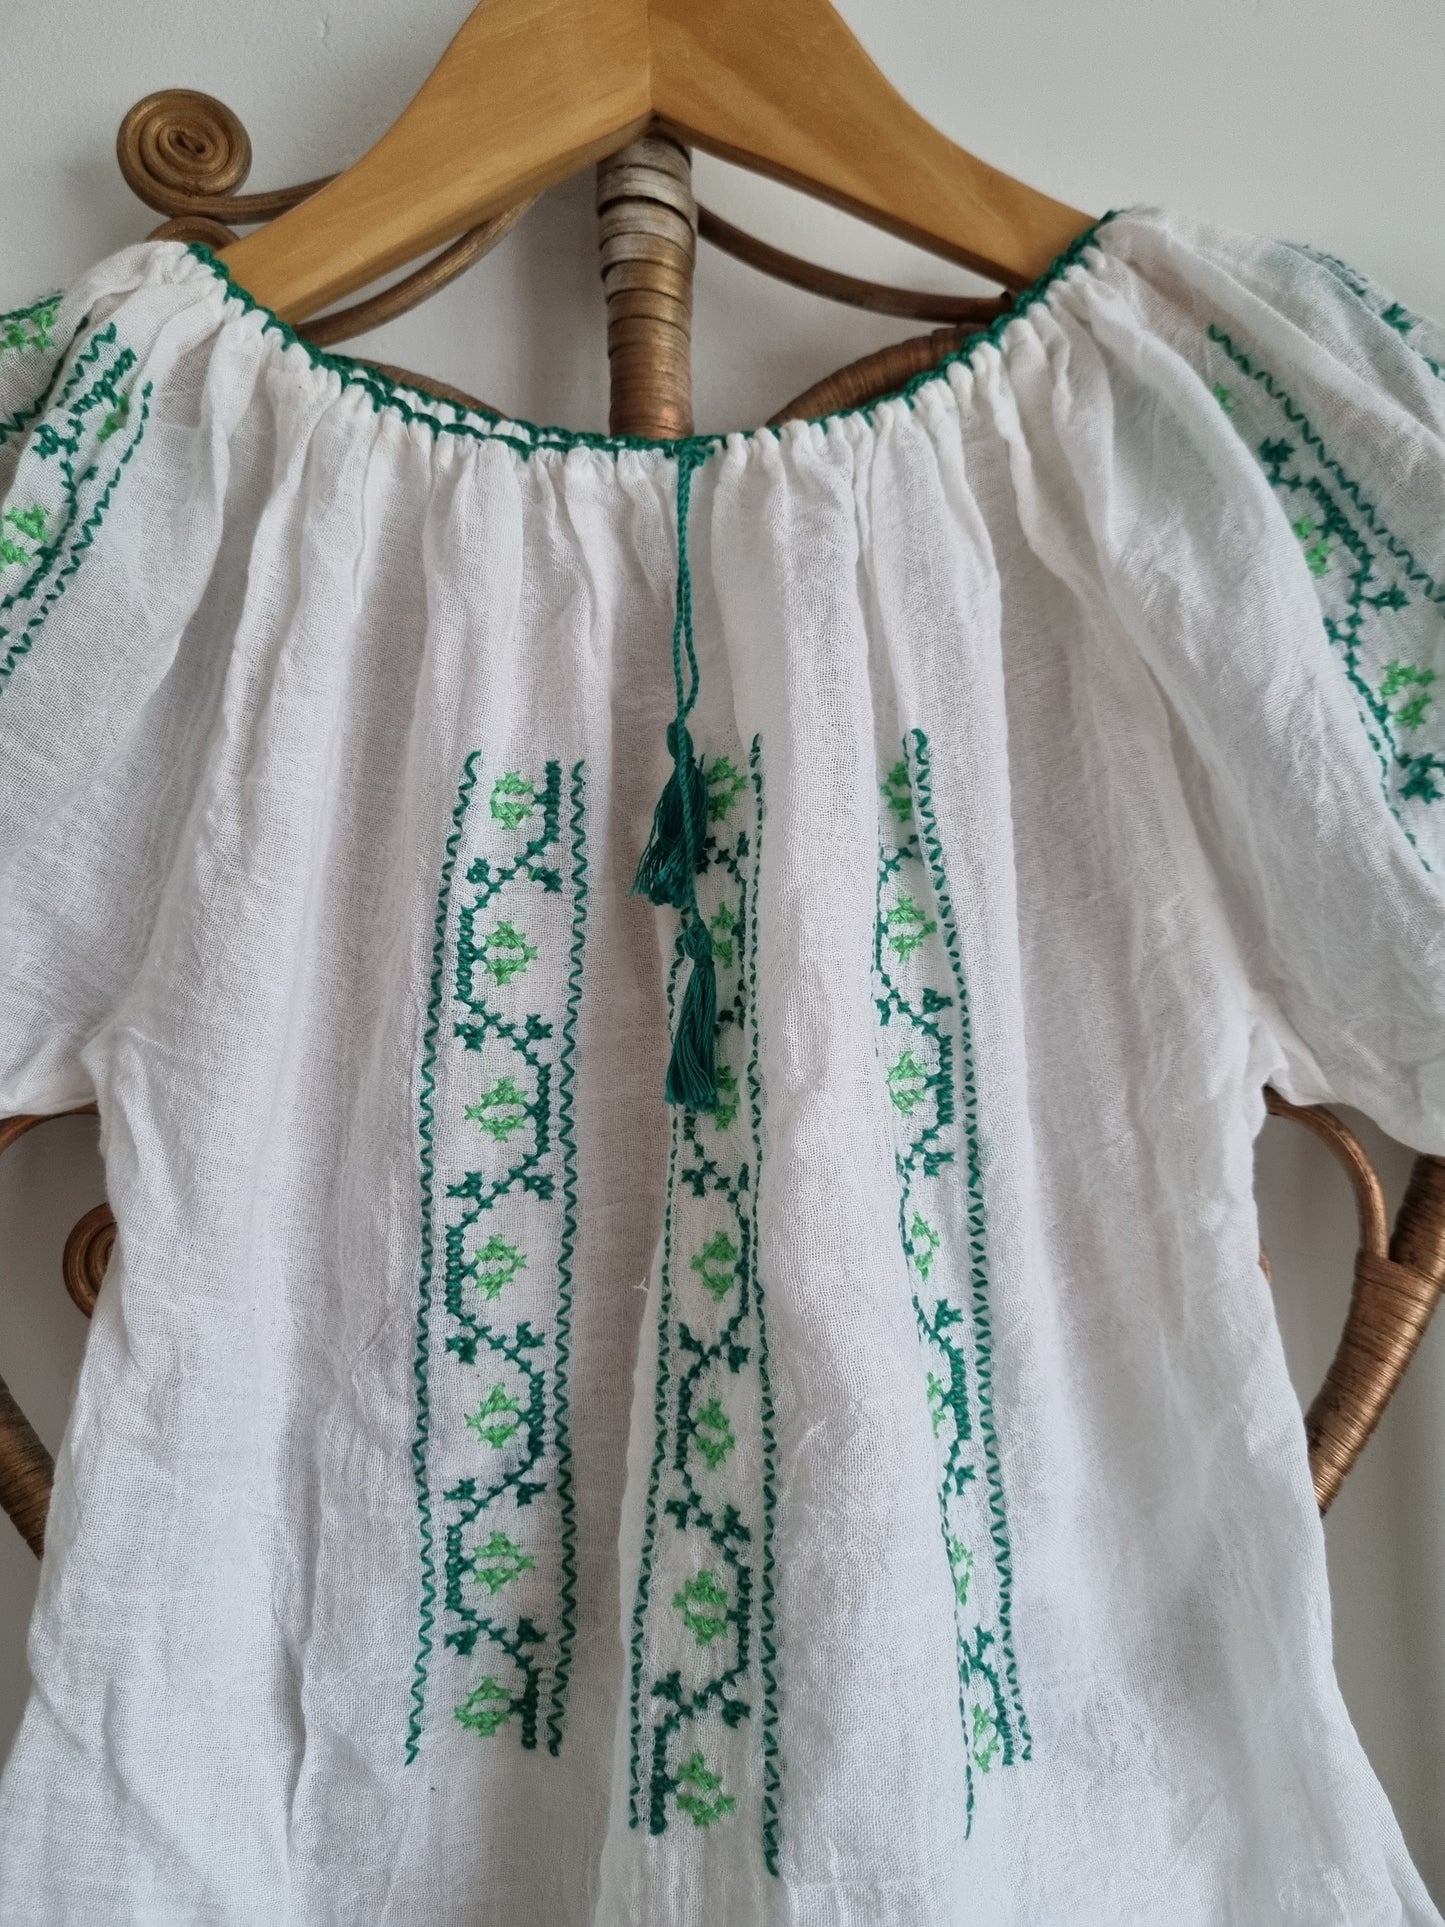 Vintage cotton cheesecloth 70s blouse child